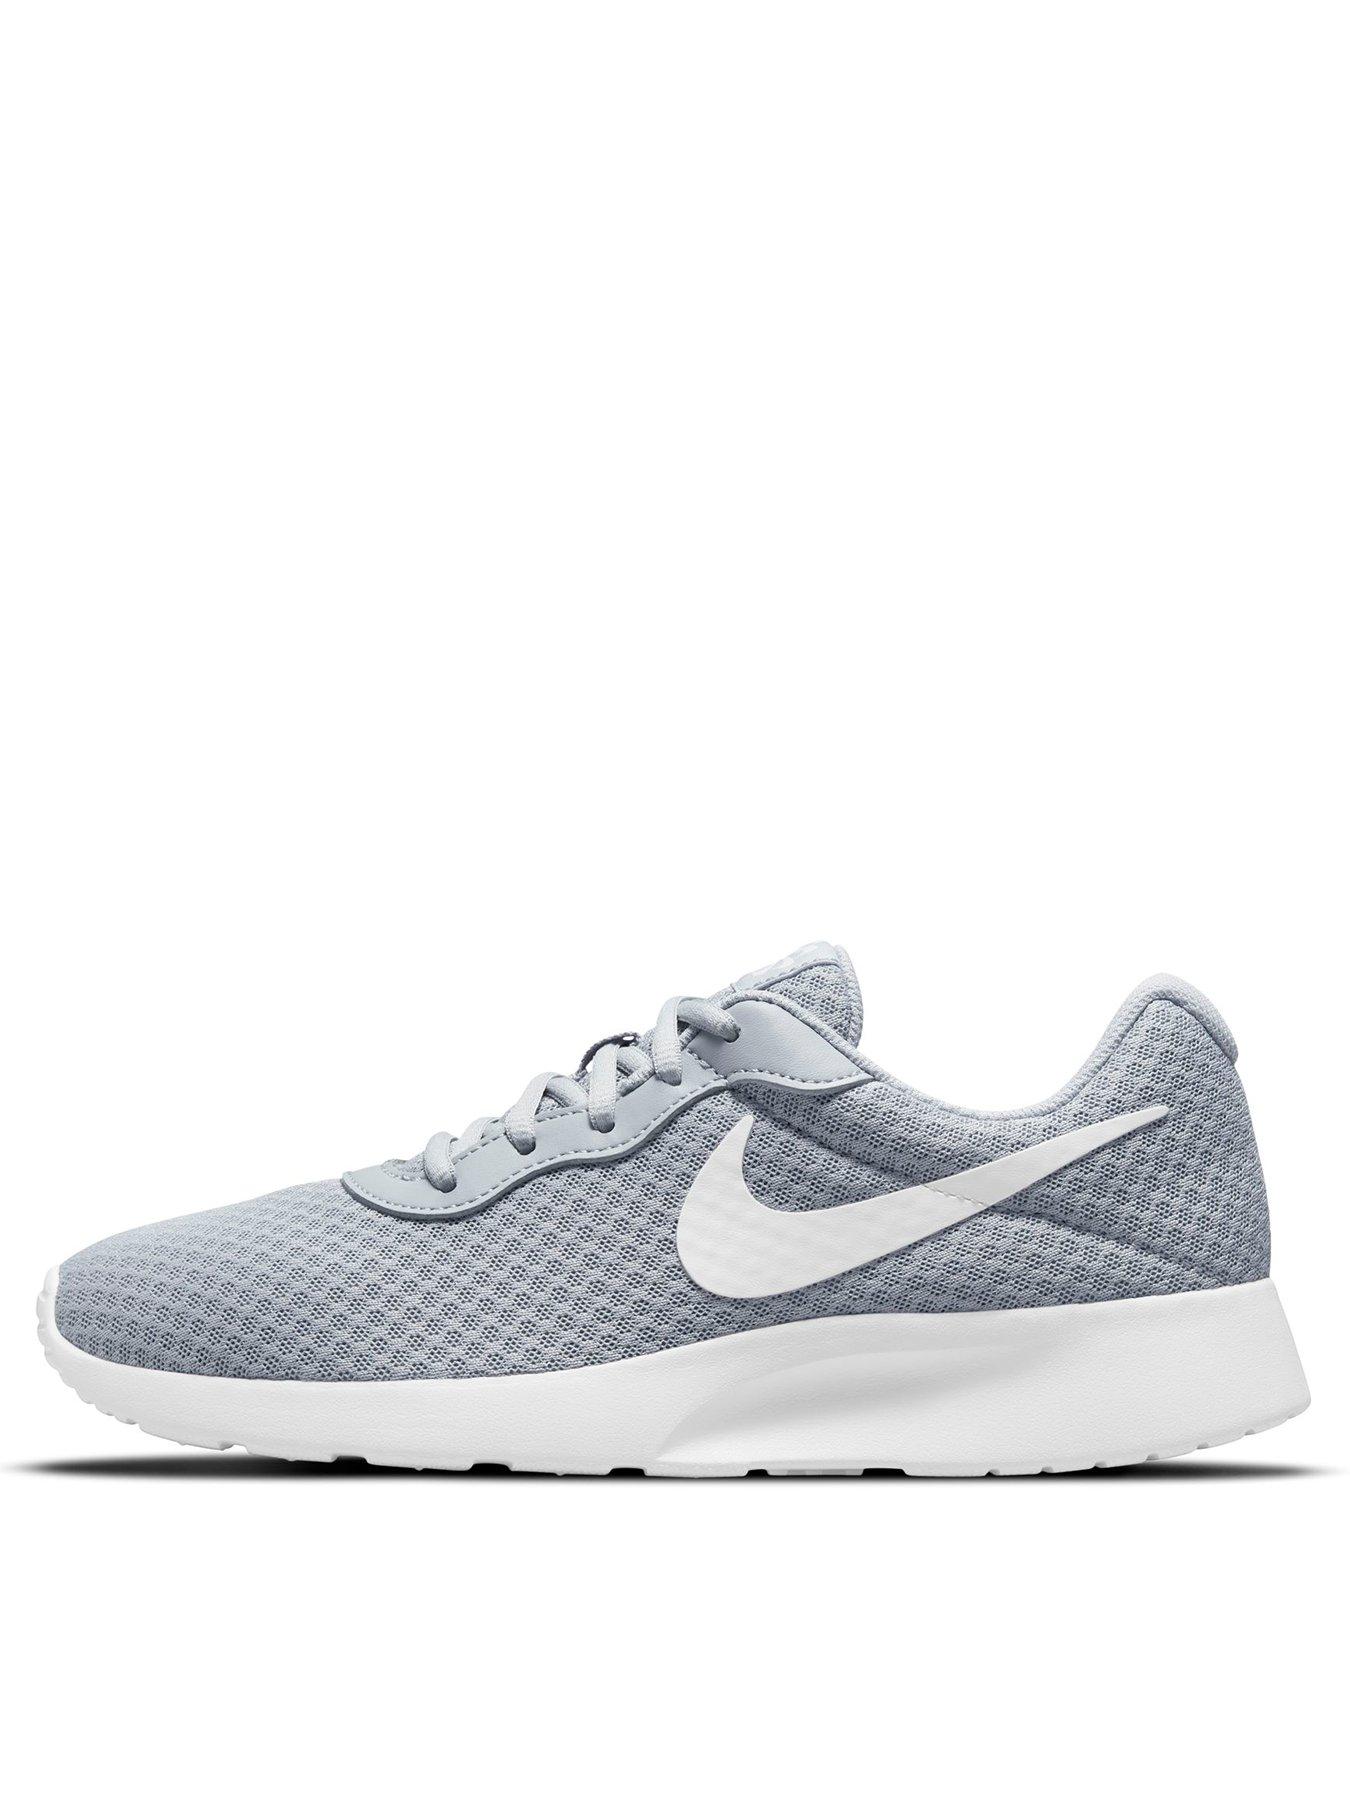 mens nike trainers littlewoods